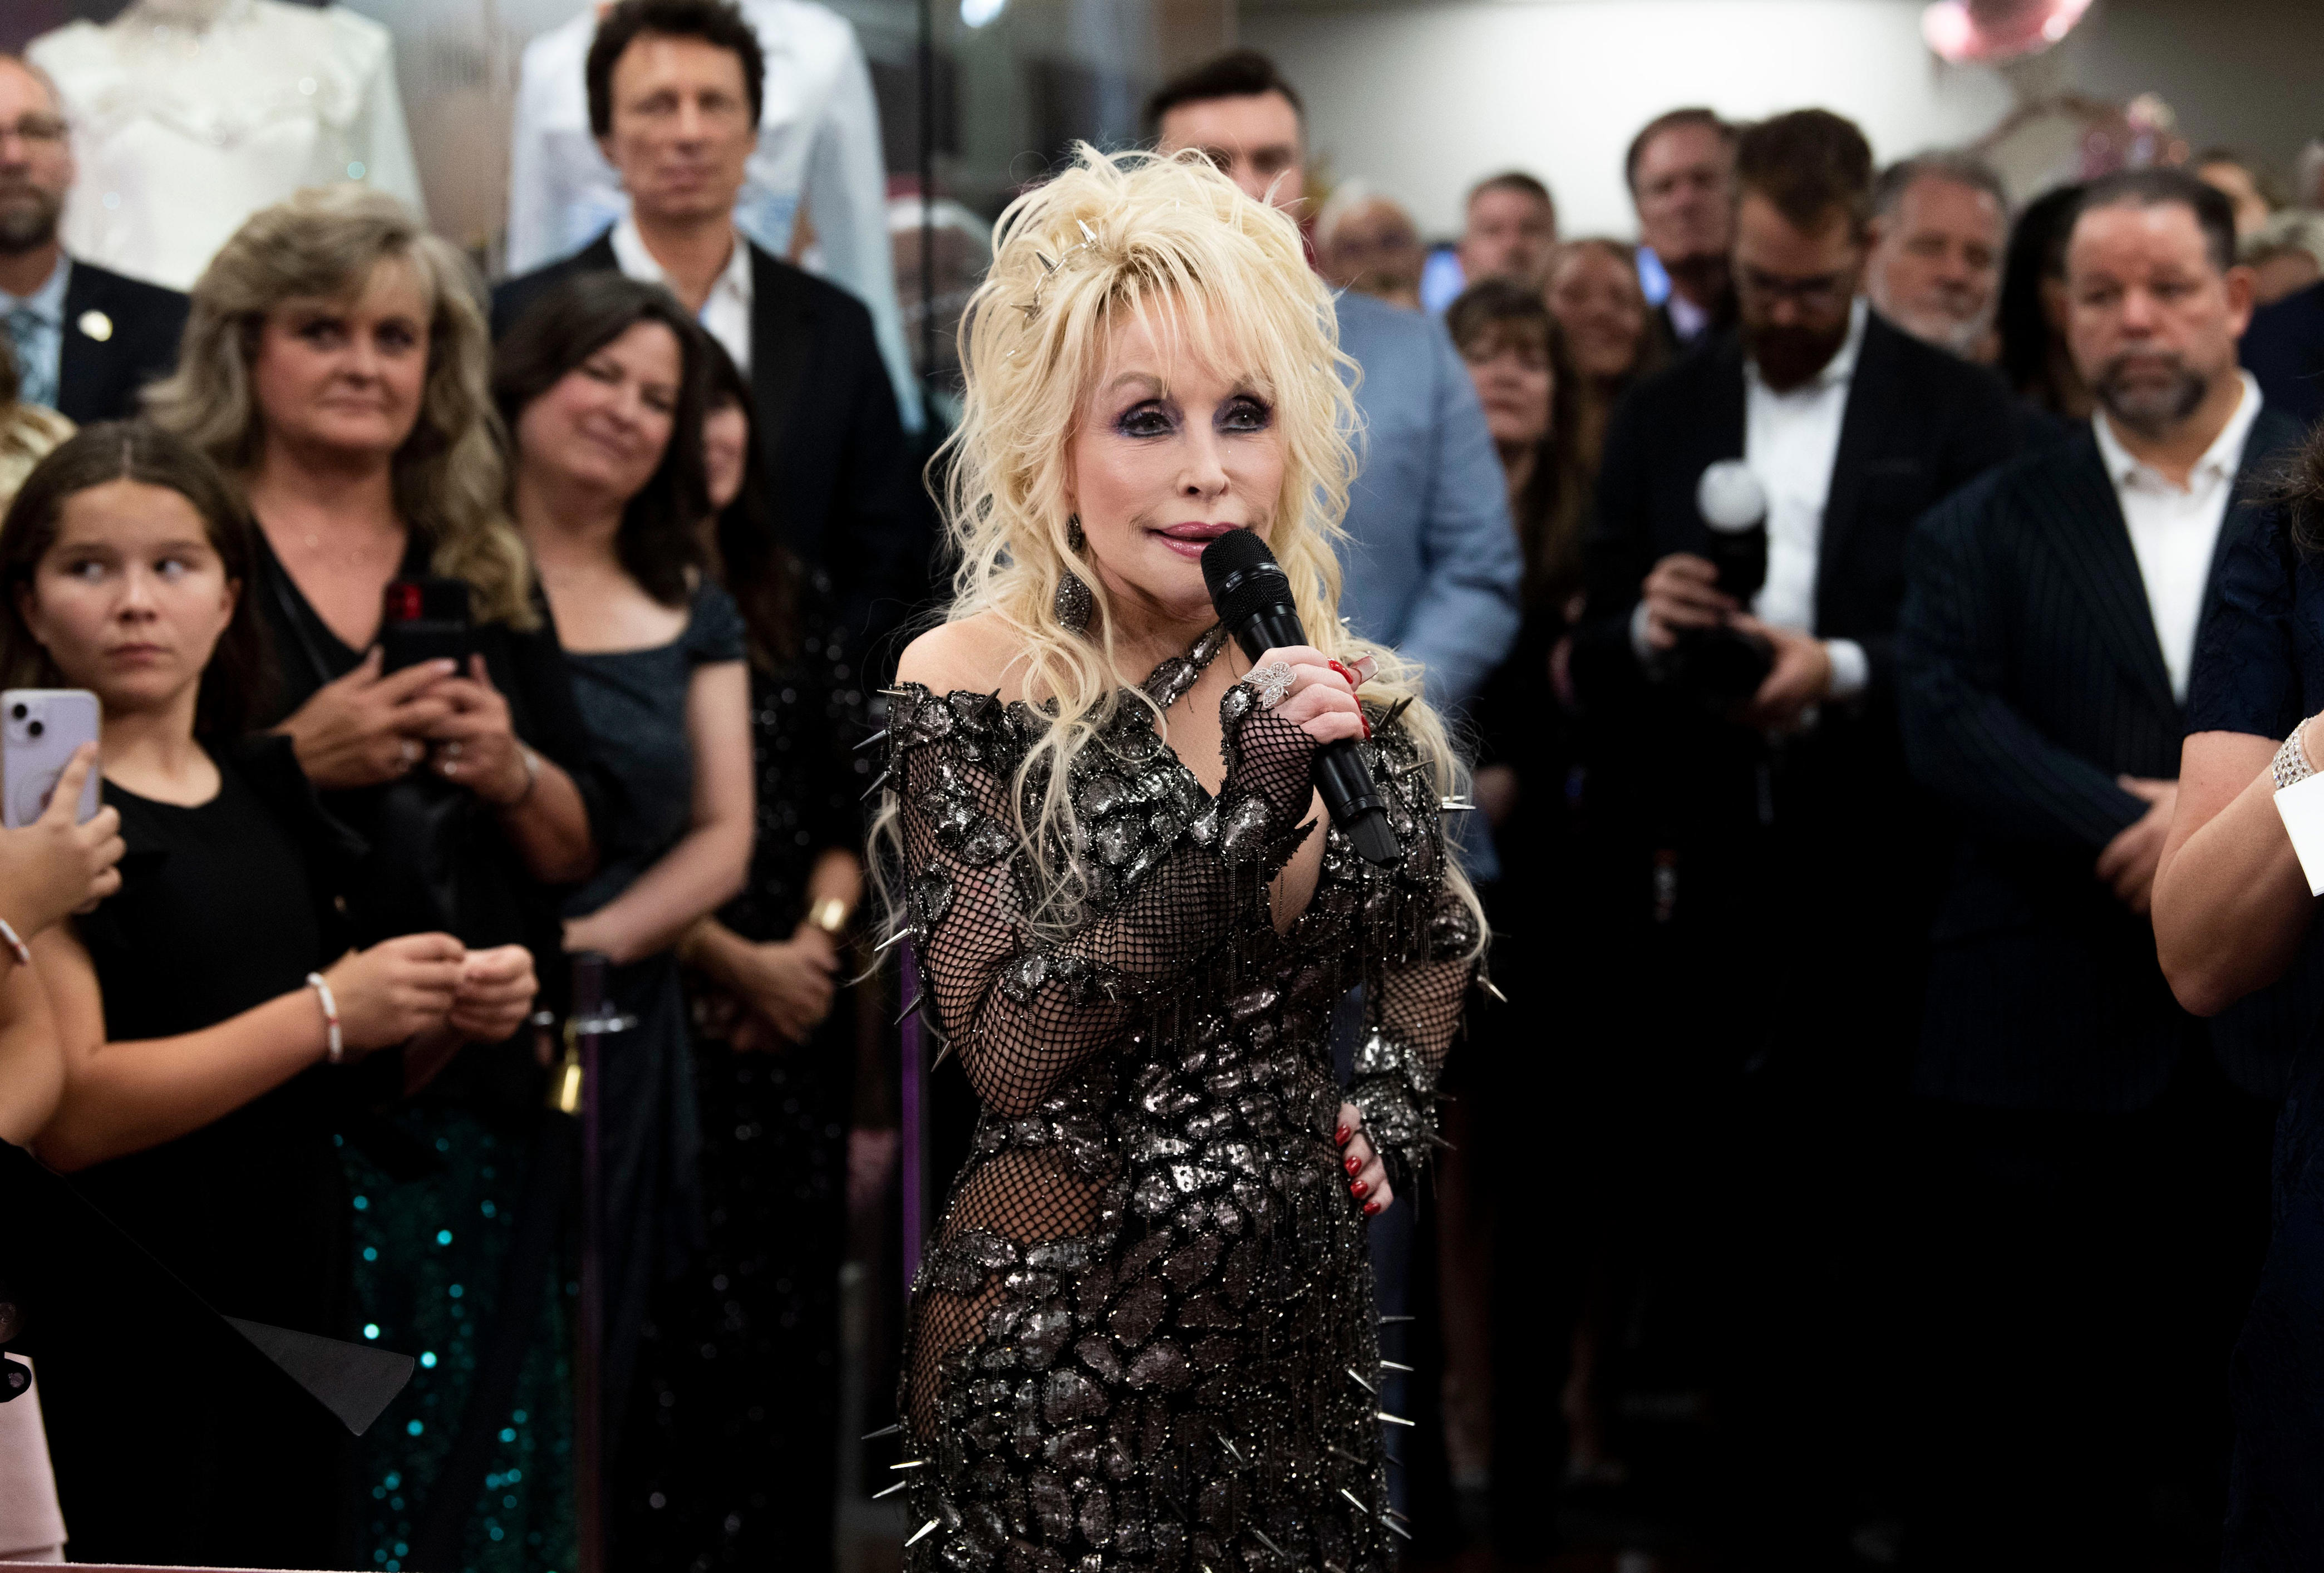 What Dolly Parton said about her fashions on display: 'That's a lotta livin' in those clothes.'